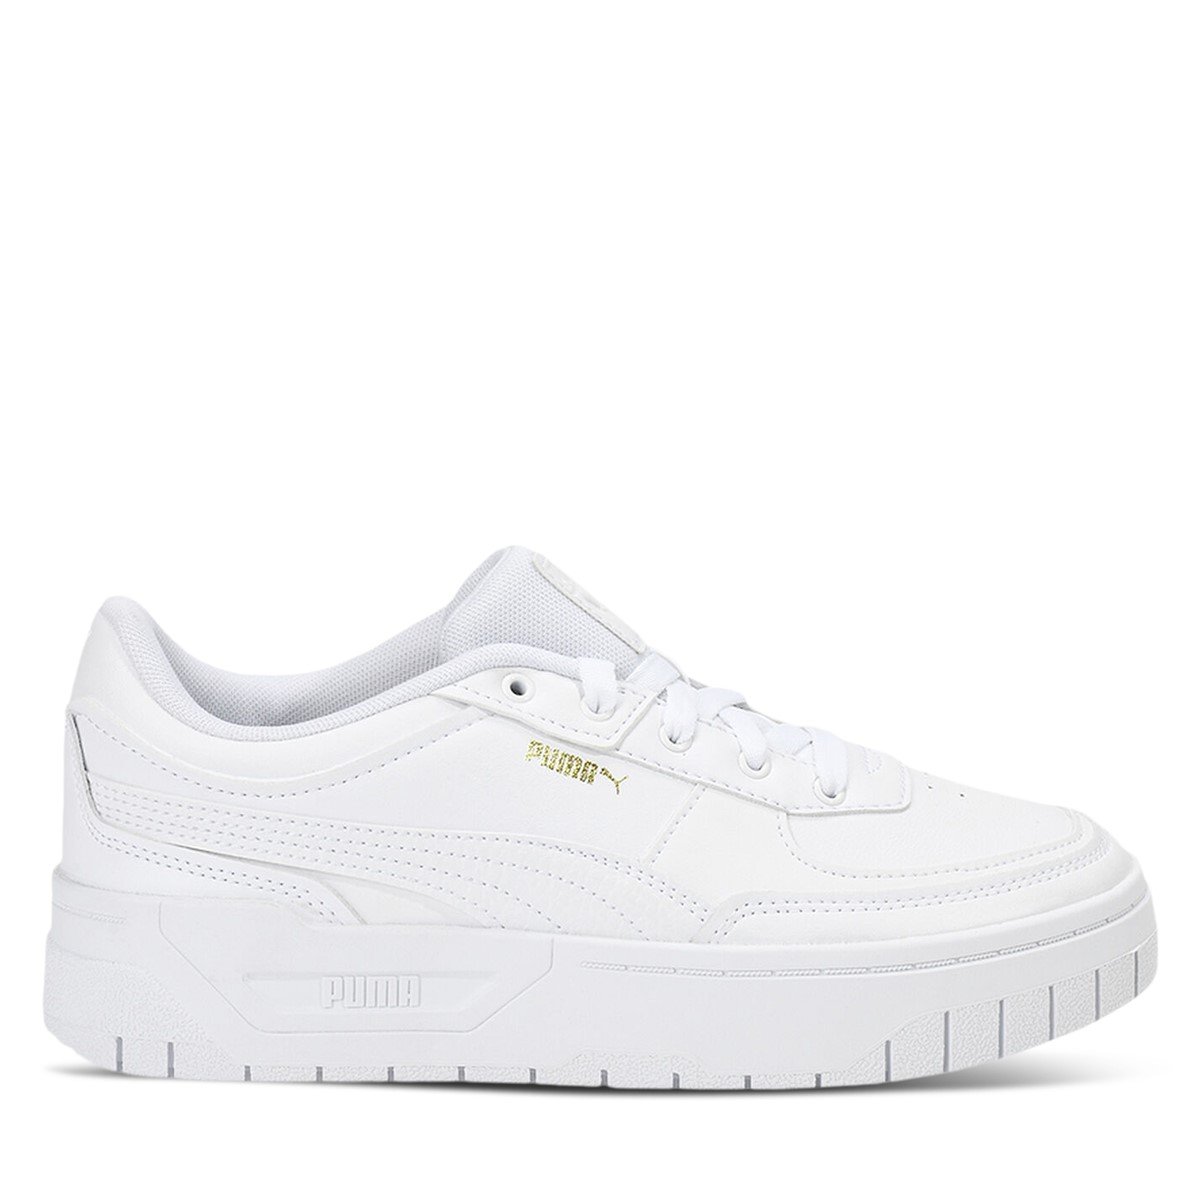 Women's Cali Dream Leather Platform Sneakers in White